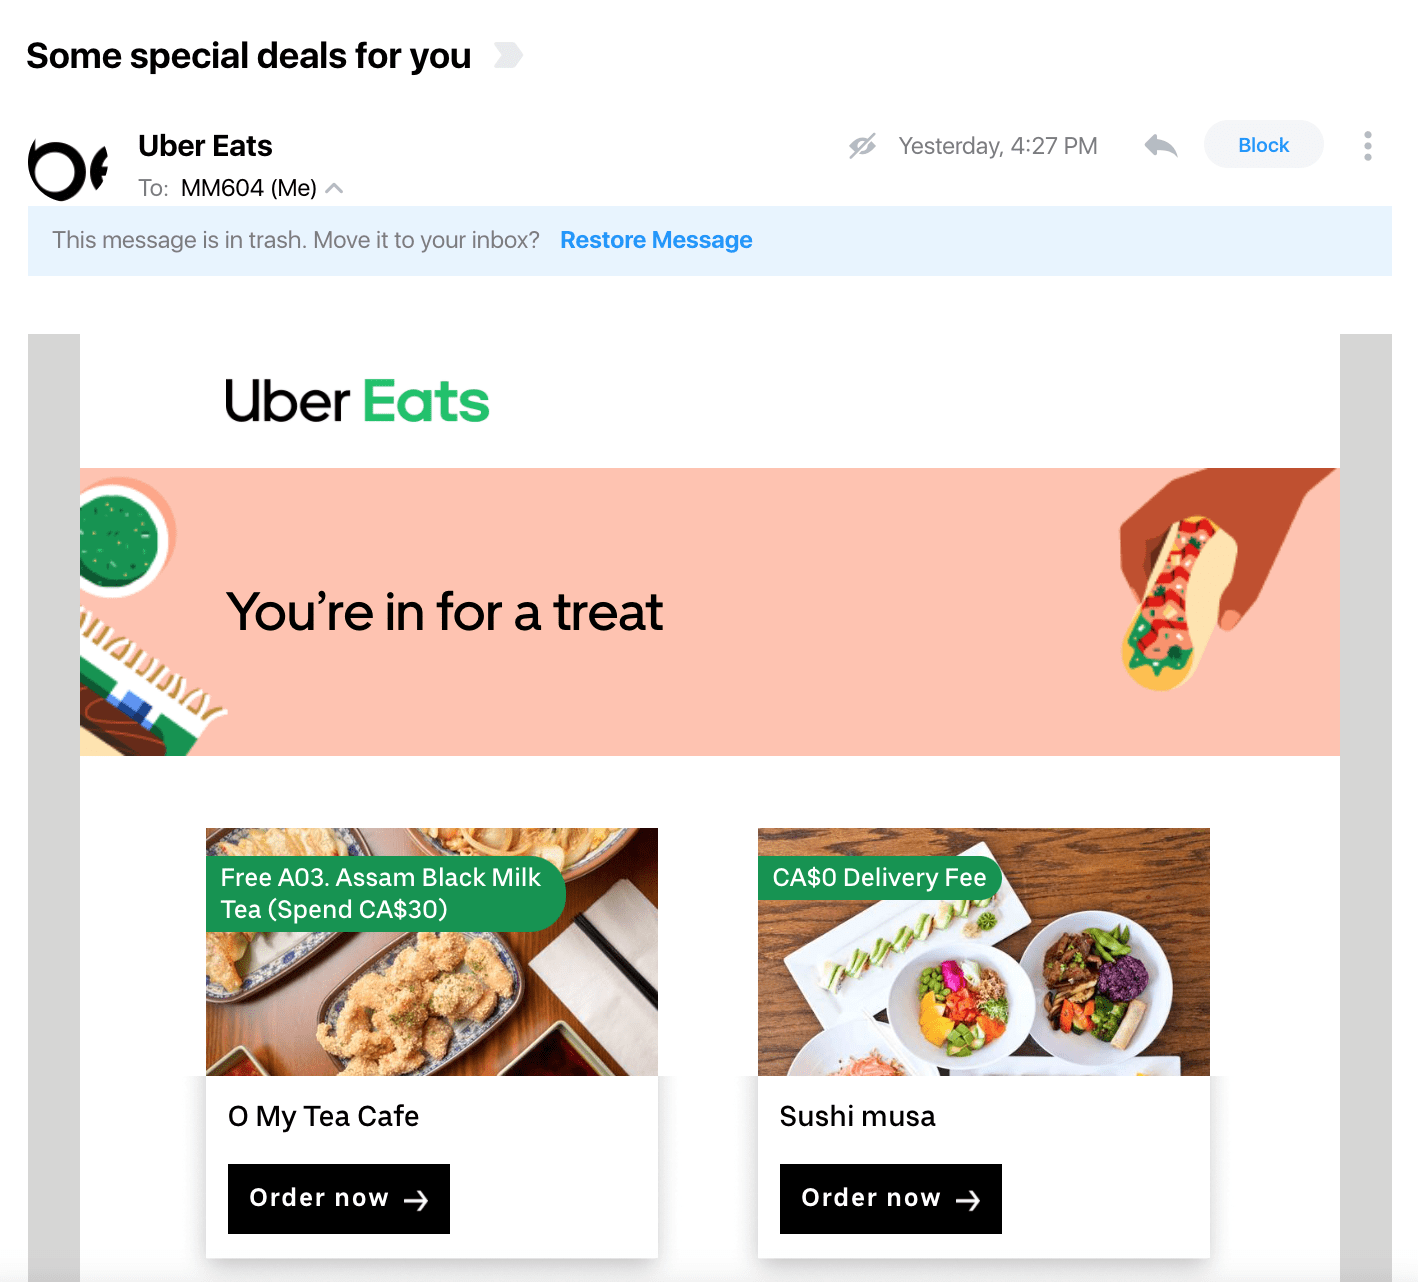 Promotional email example from Uber Eats